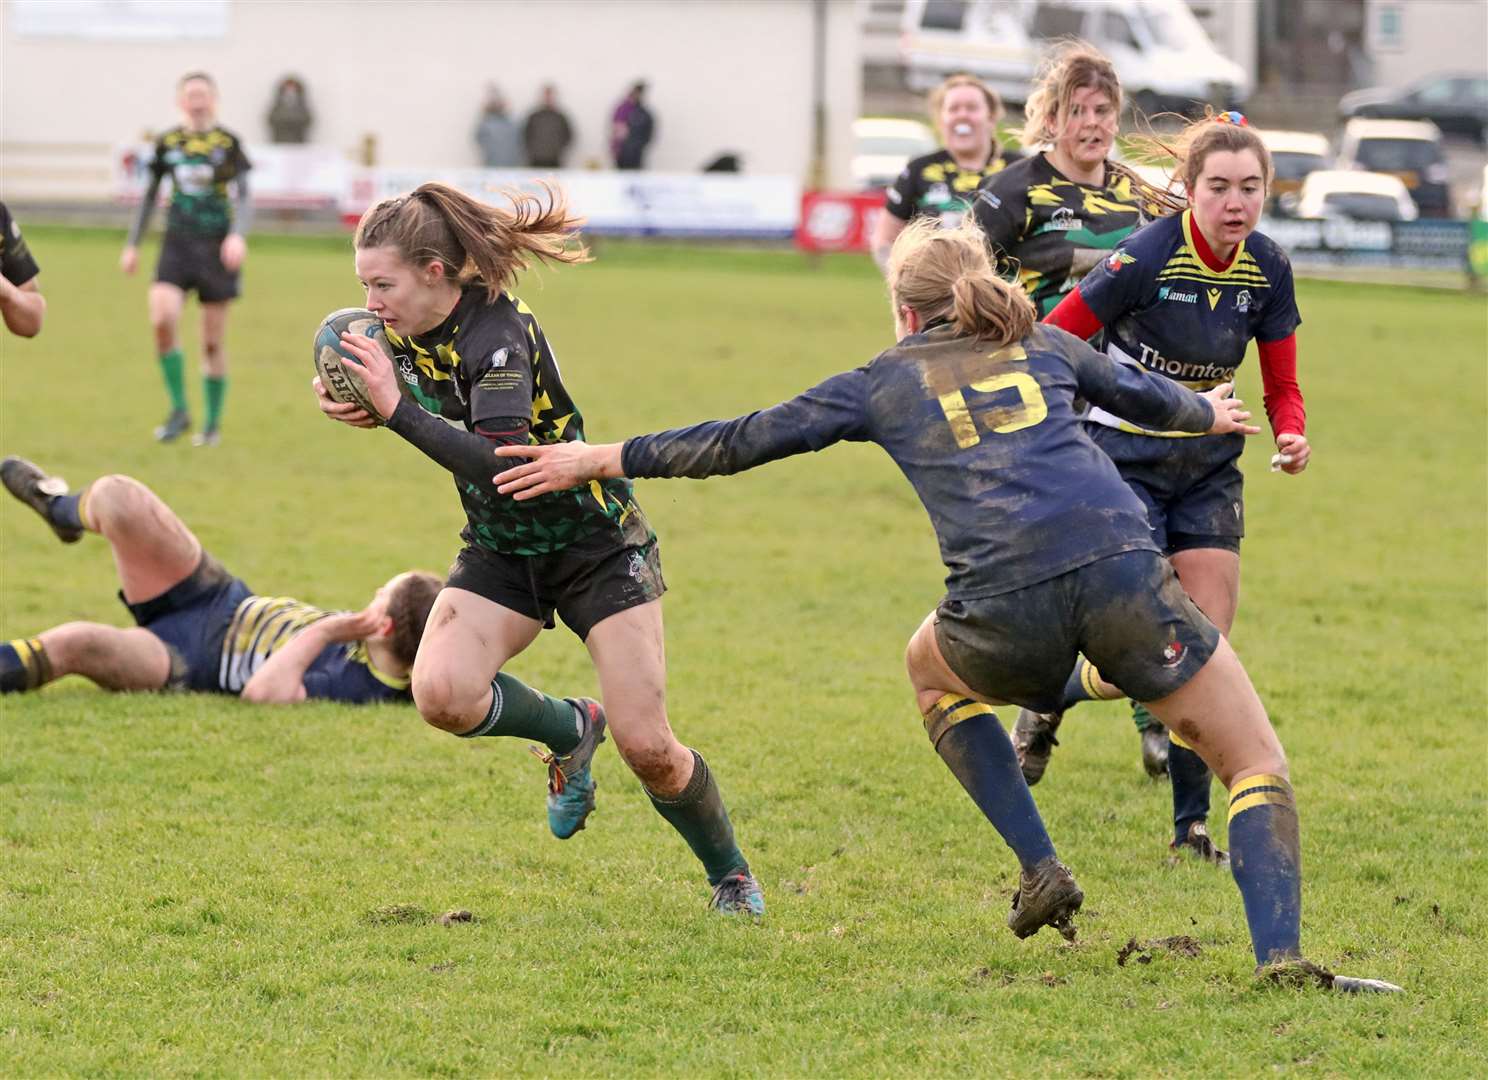 Caitlin Harvey beats the Dundee Valkyries full-back on her way to scoring a try. Picture: James Gunn